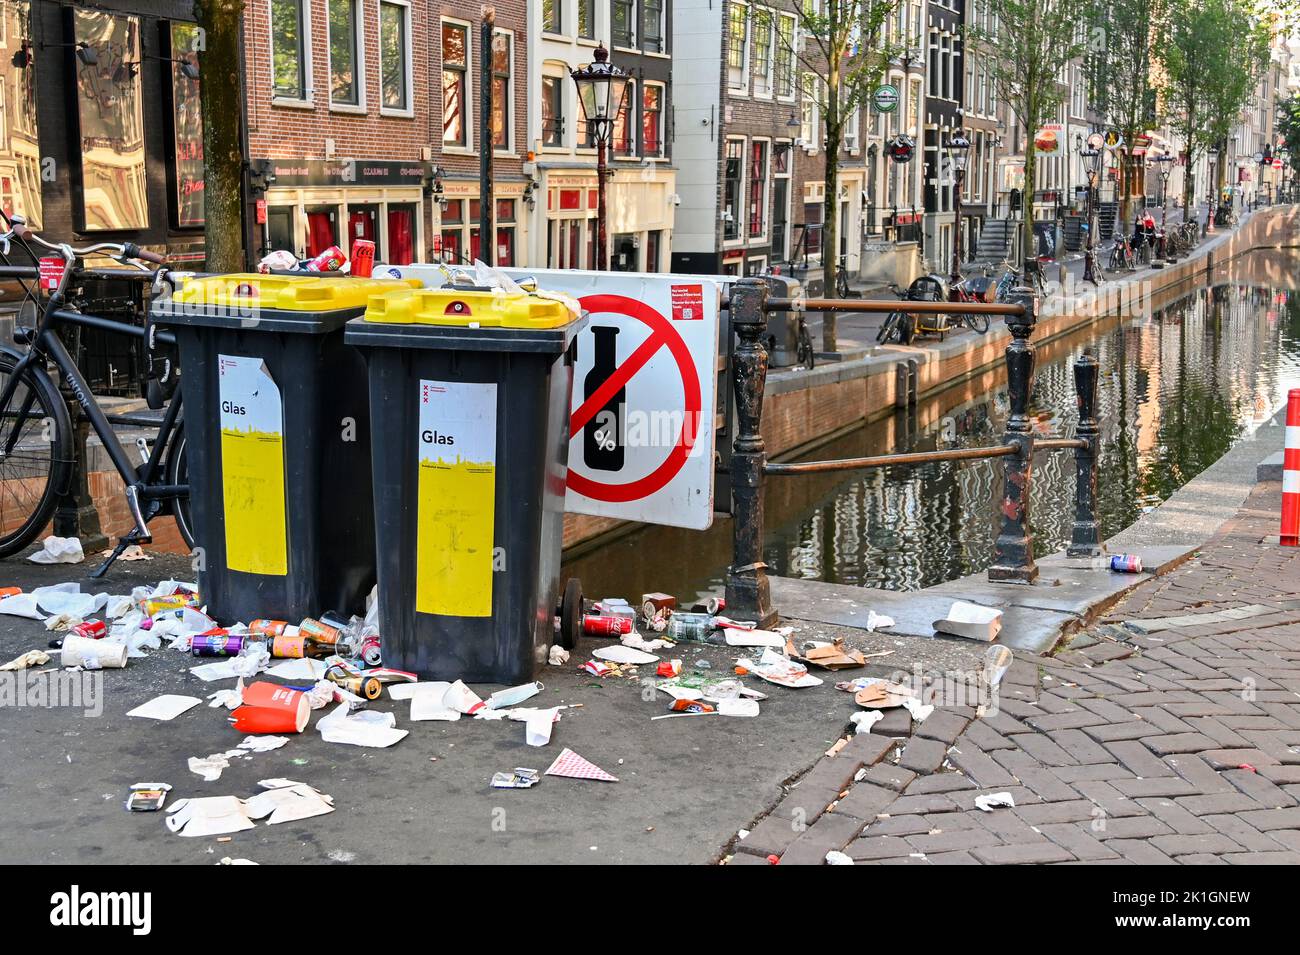 Amsterdam, Netherlands - August 2022: Rubbish and litter dumped alongside waste bins on a street in the centre of Amsterdam Stock Photo